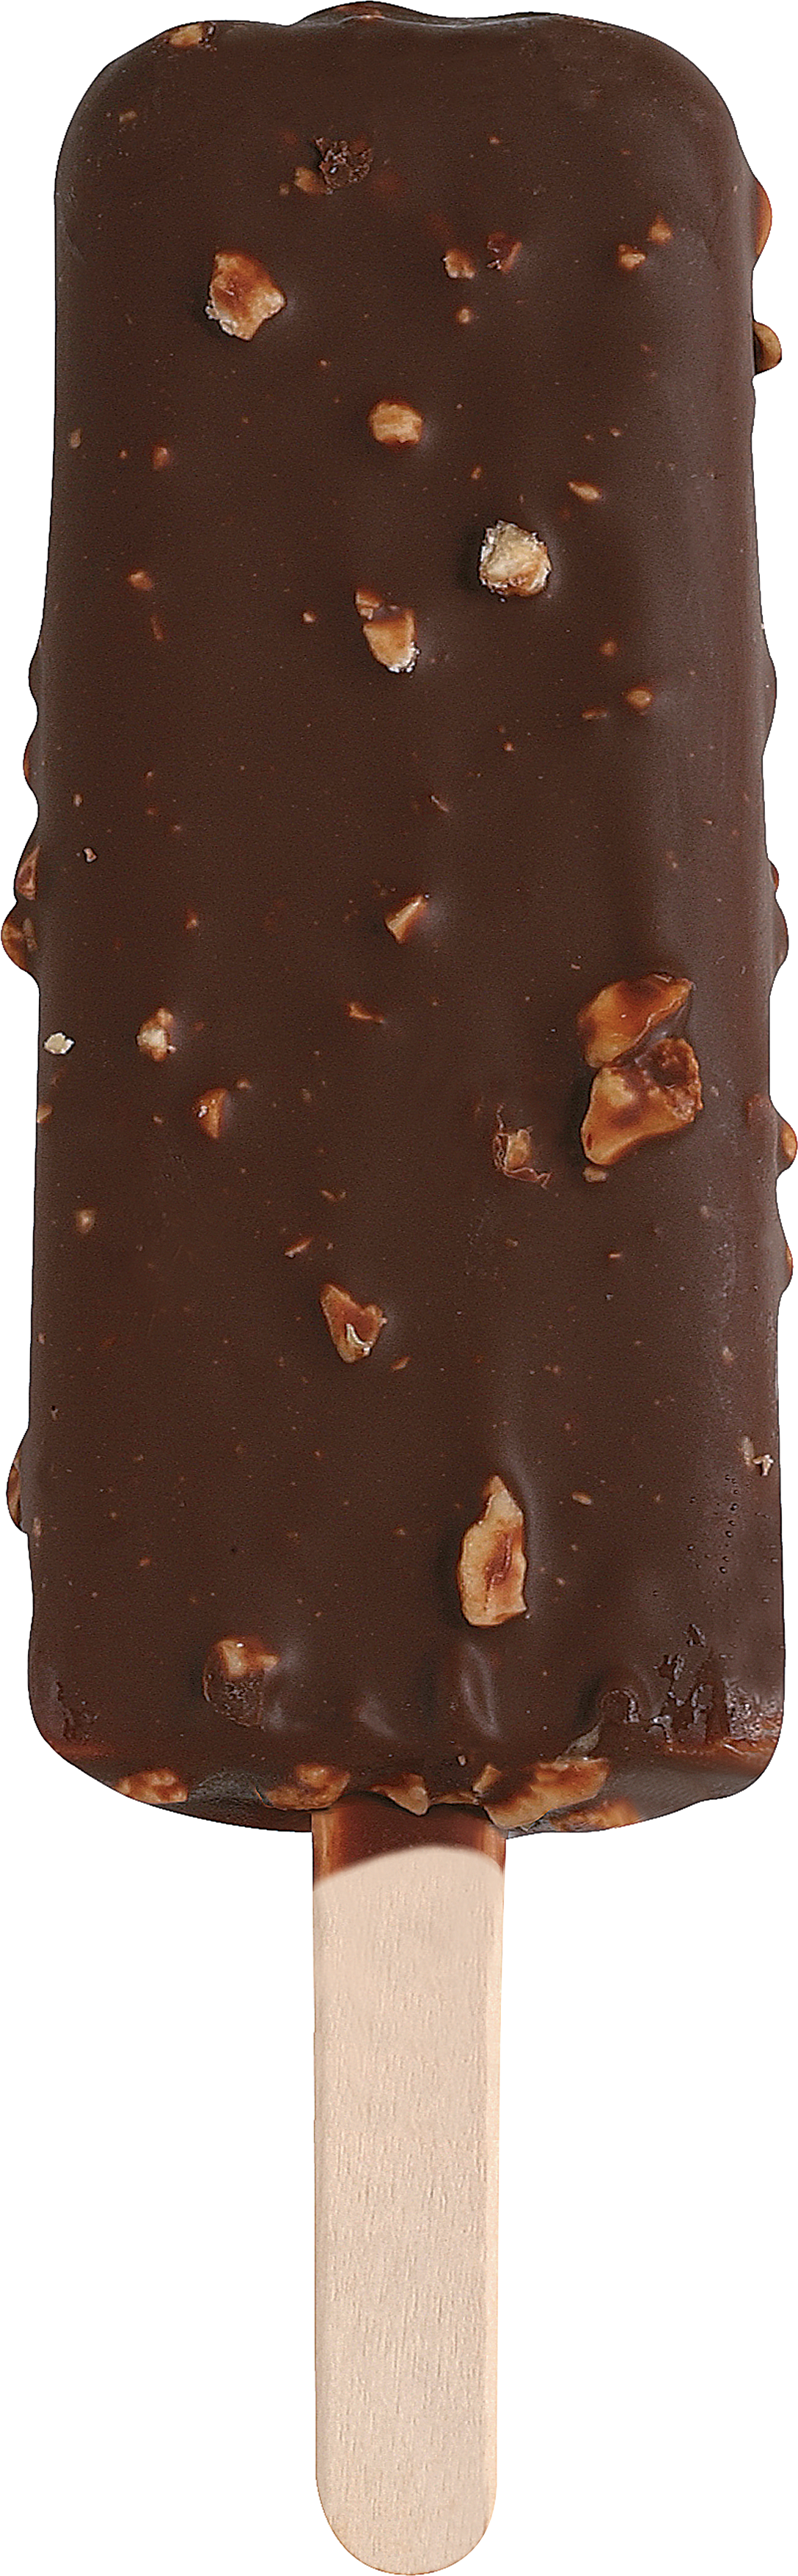 Chocolate Nuts Ice Lolly PNG Image